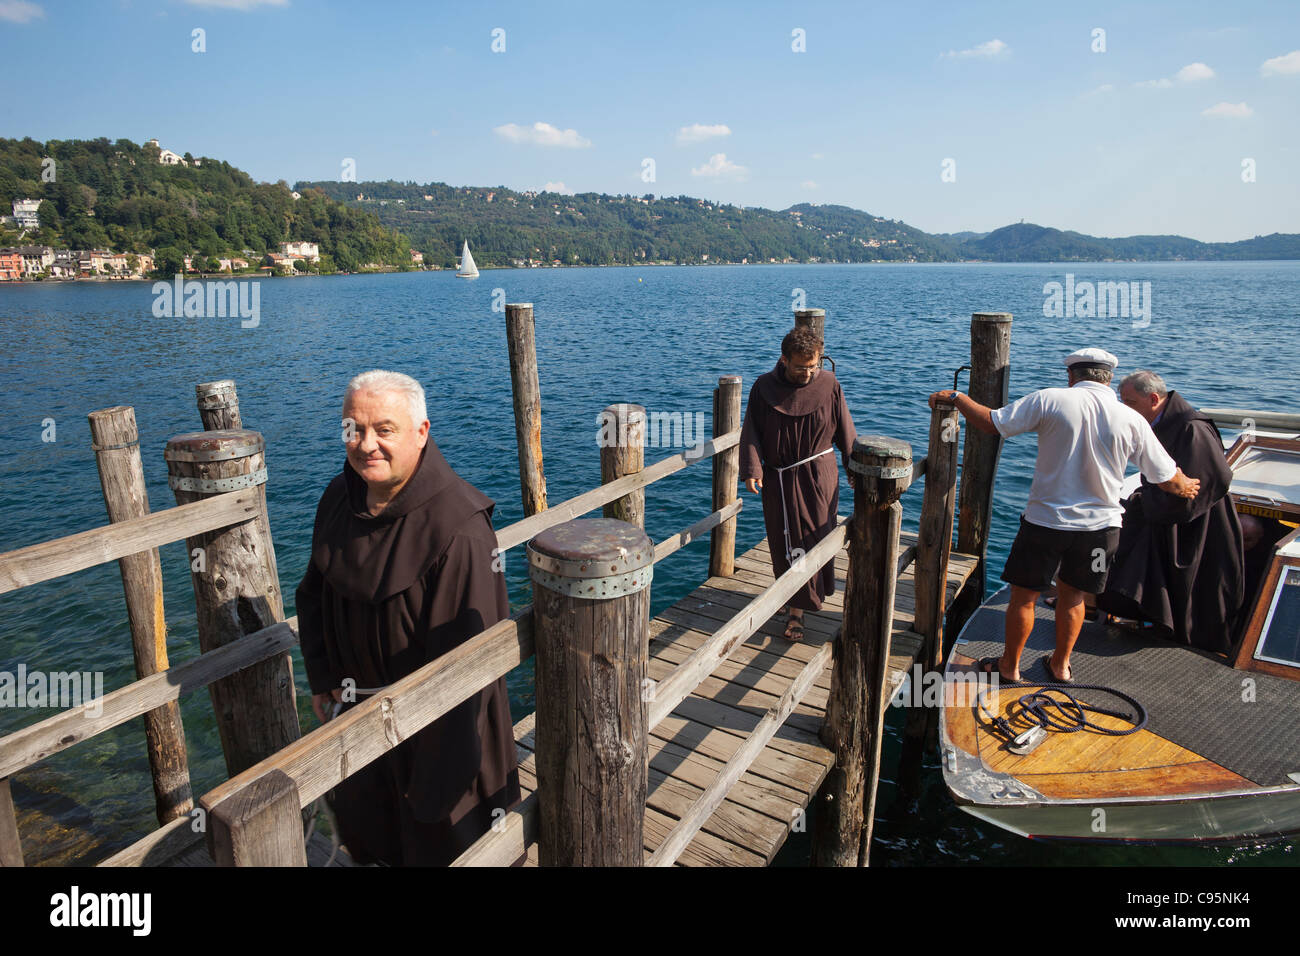 Italy, Piedmont, Lake Orta, Franciscan Monks Arriving at San Giulio Island Stock Photo